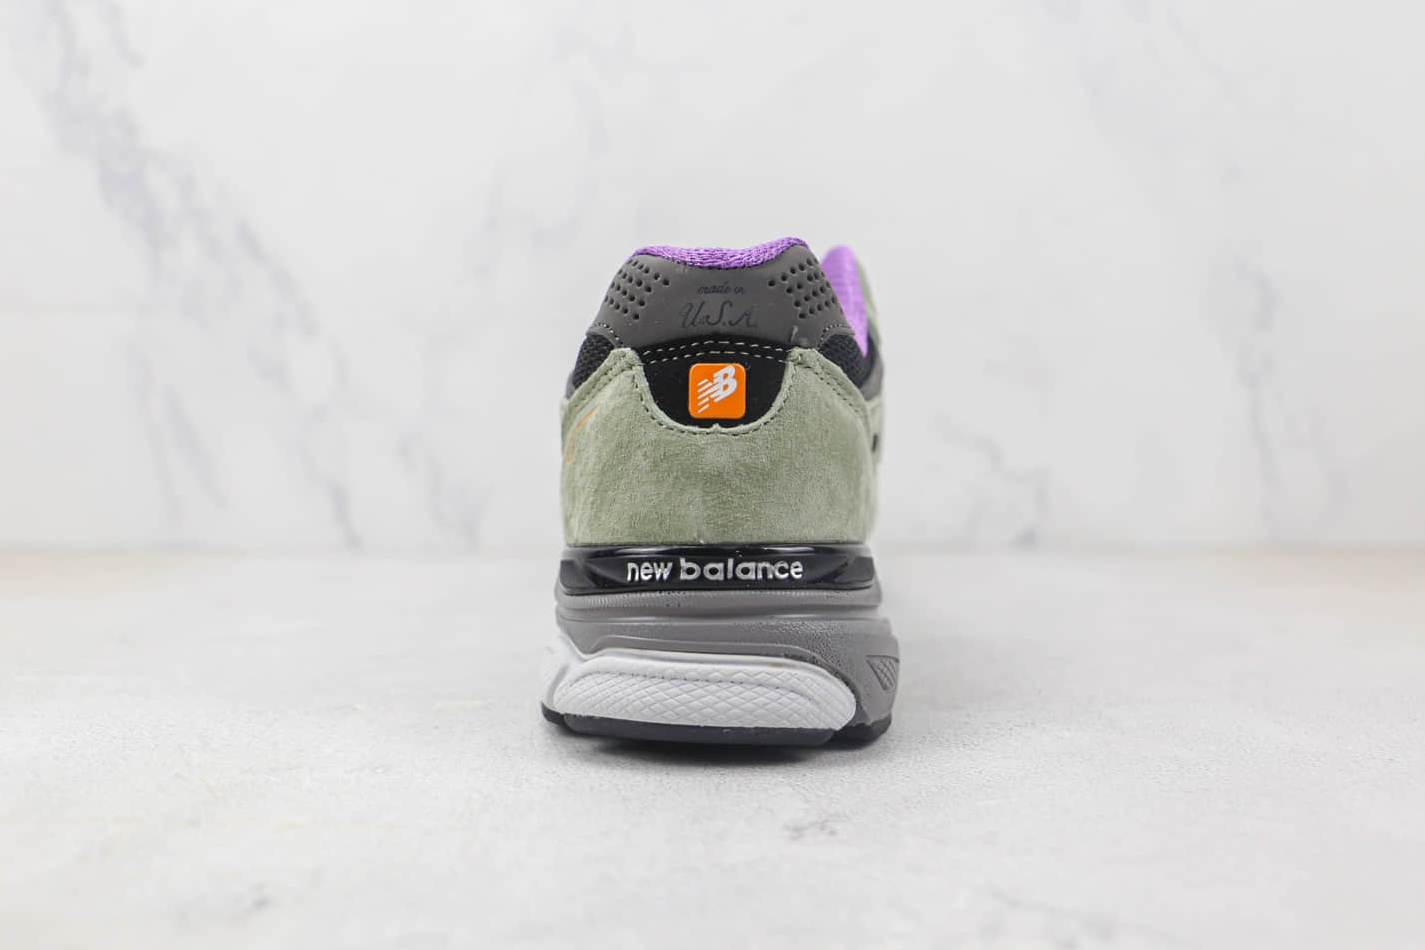 New Balance Teddy Santis x 990v3 'Olive Leaf' M990TC3 − Limited Edition Collaboration - Exciting New Release!